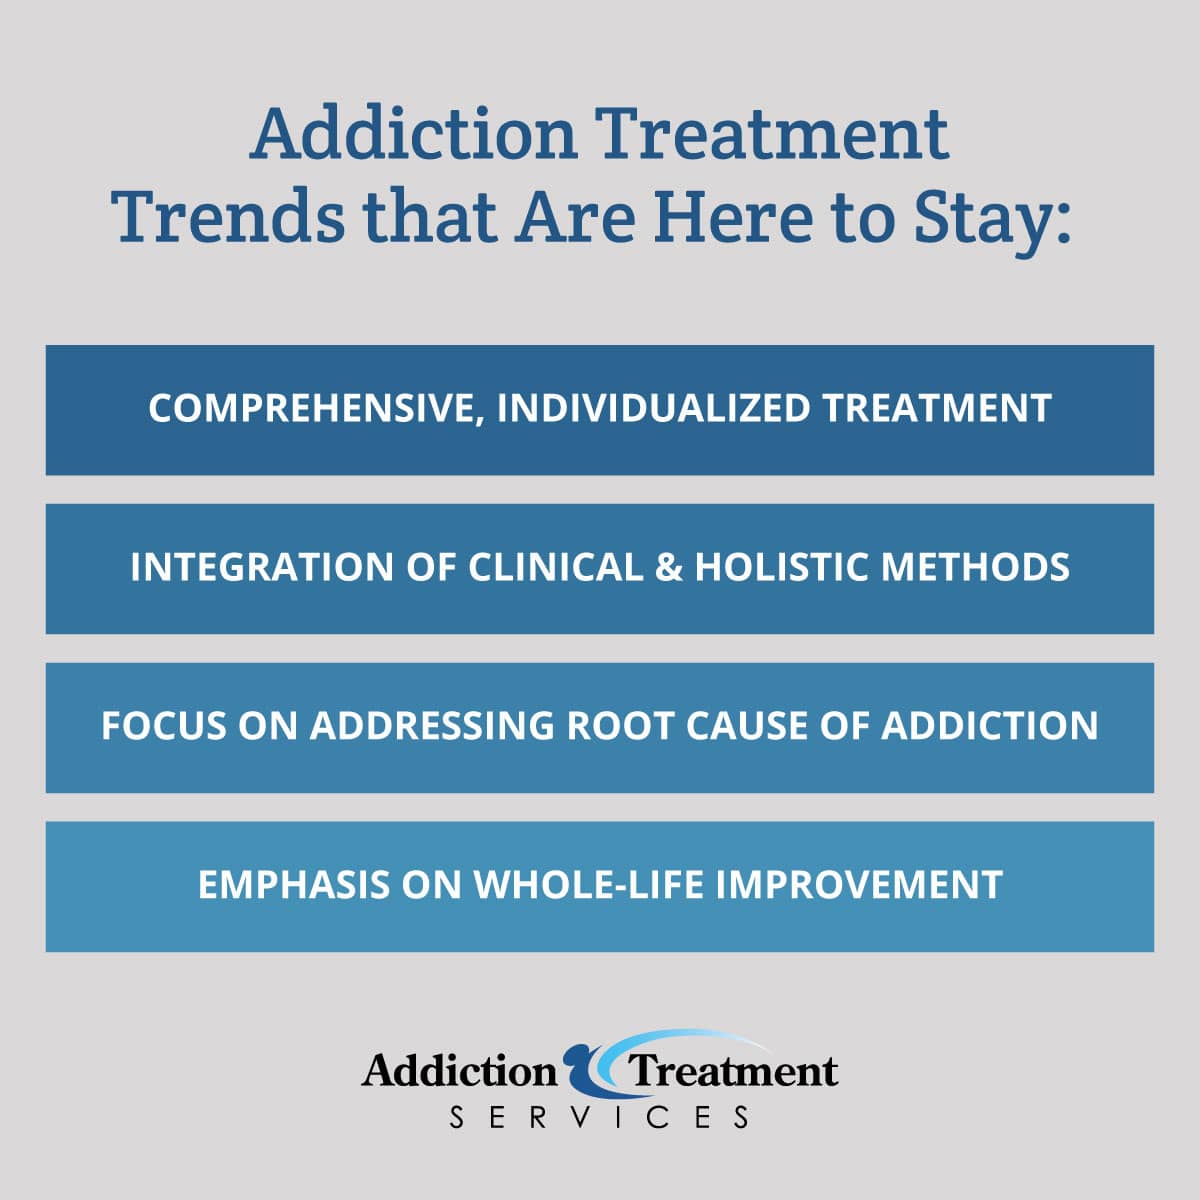 New Addiction Treatment Trends That Are Here to Stay - ATS